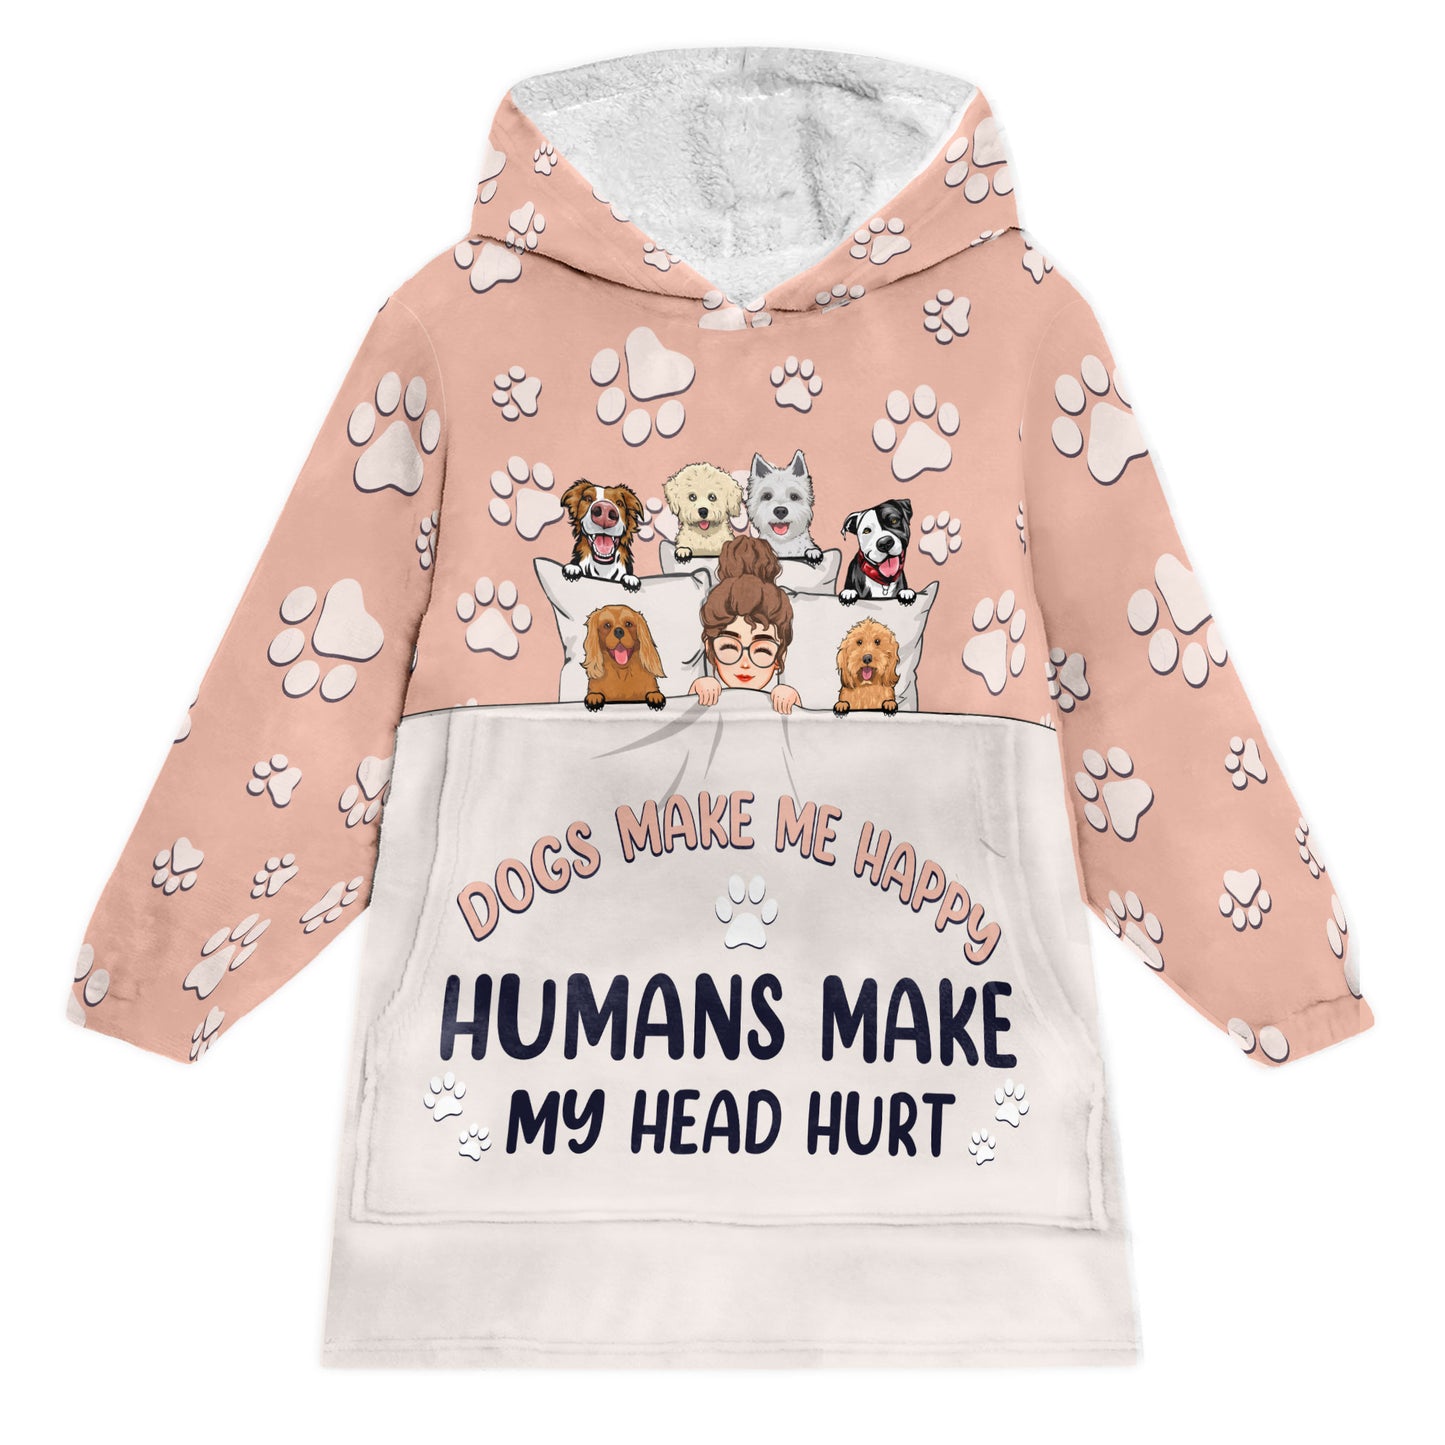 Dogs Make Me Happy, Humans Make My Head Hurt - Personalized Oversized Blanket Hoodie